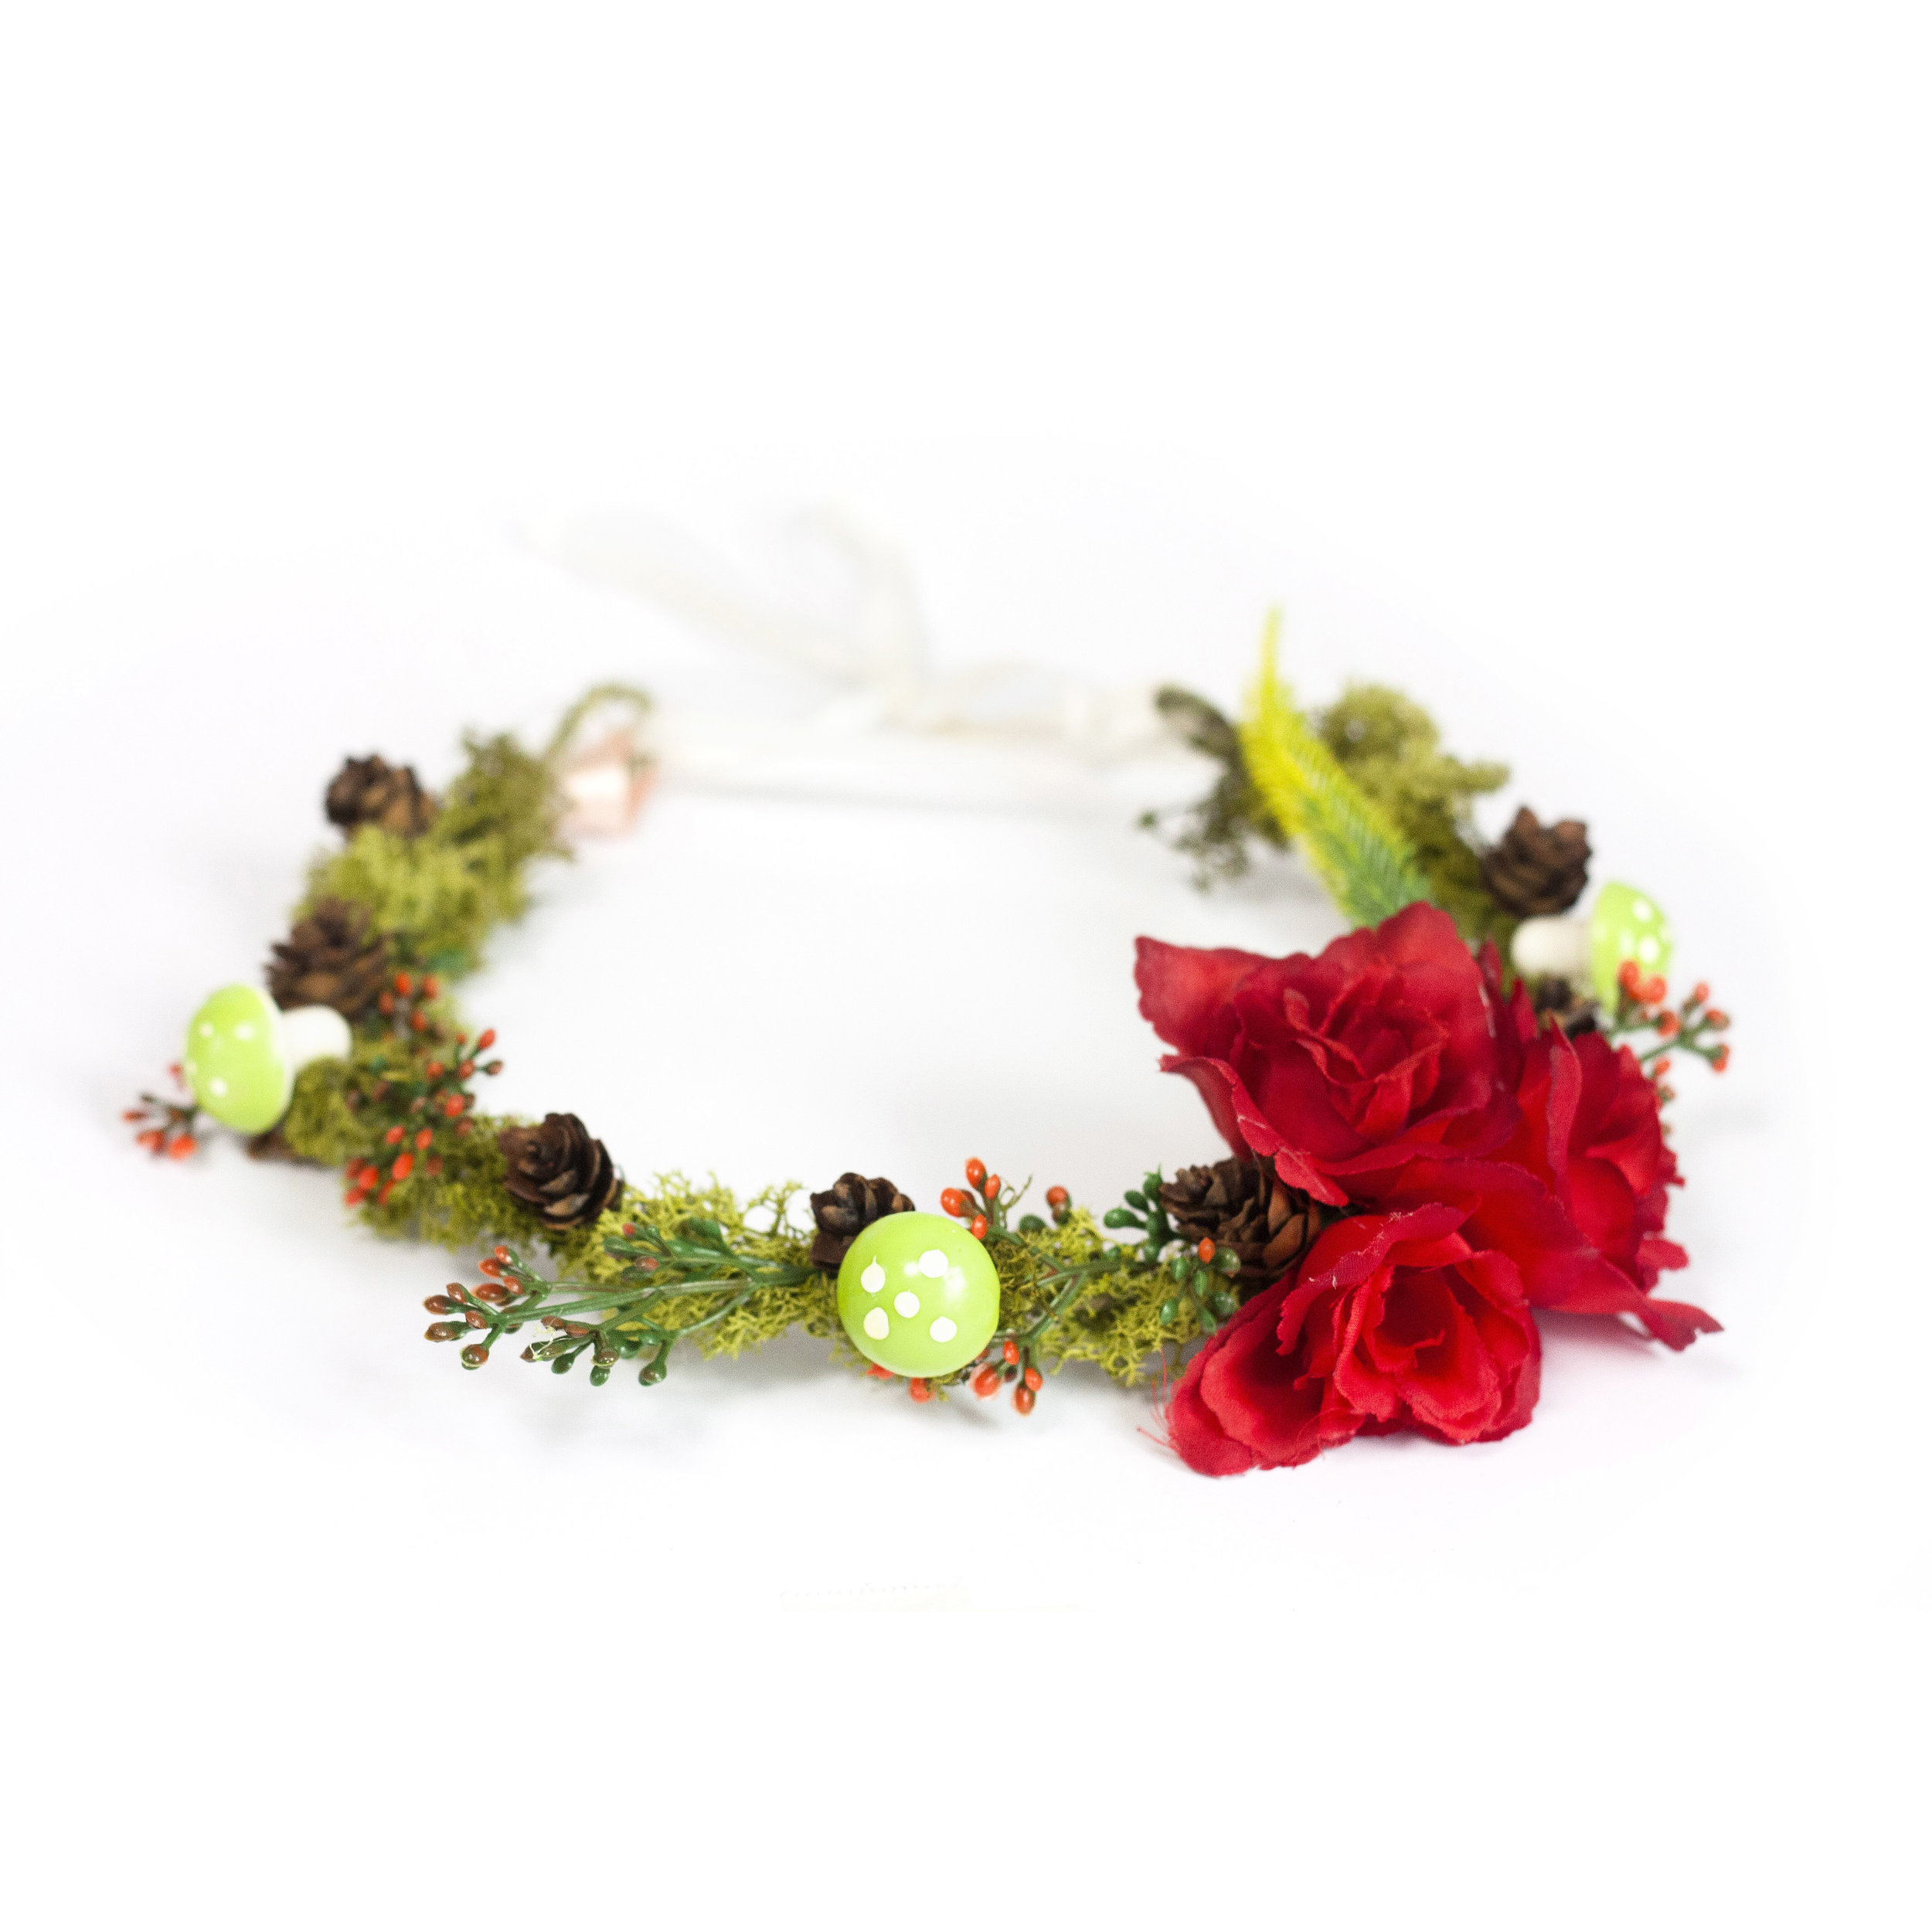 Seasonal Twists for Chic Winter Crowns | The Crafty Hen